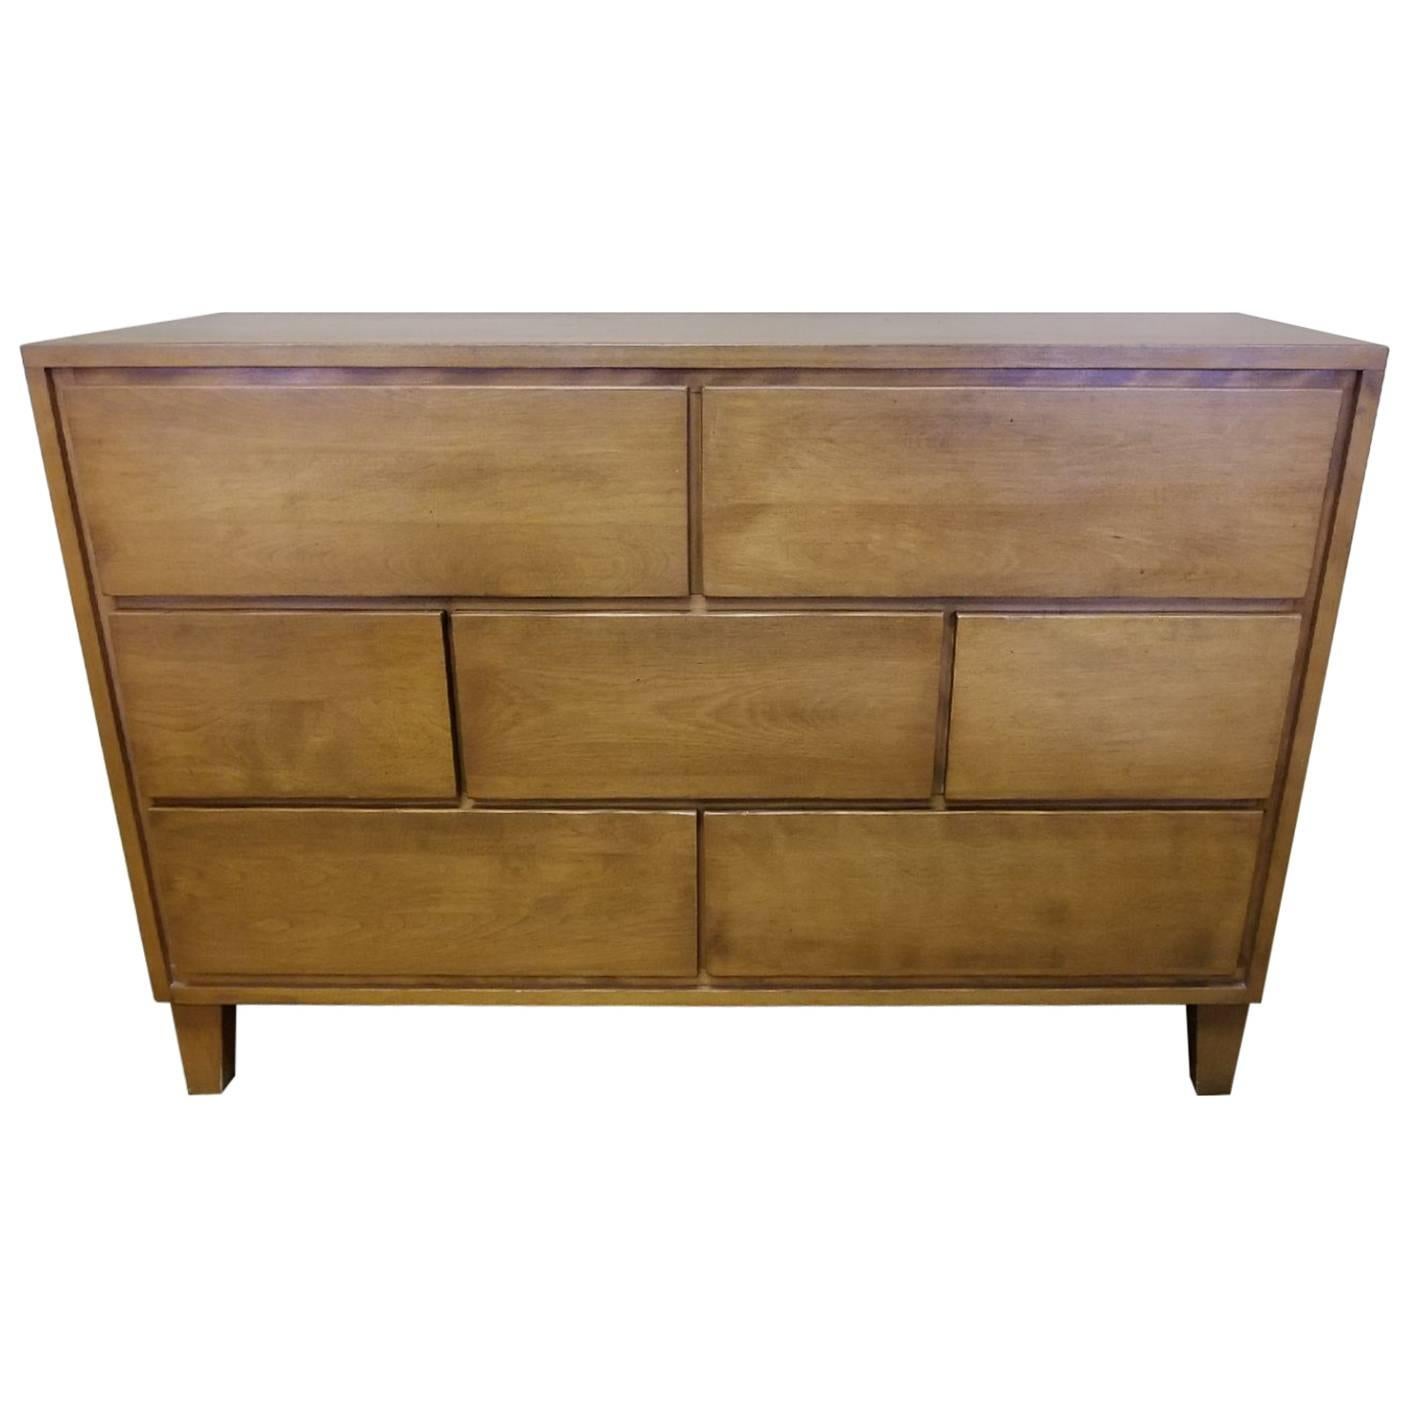 Dresser or Chest of Drawers by Leslie Diamond for Conant Ball ModernMates